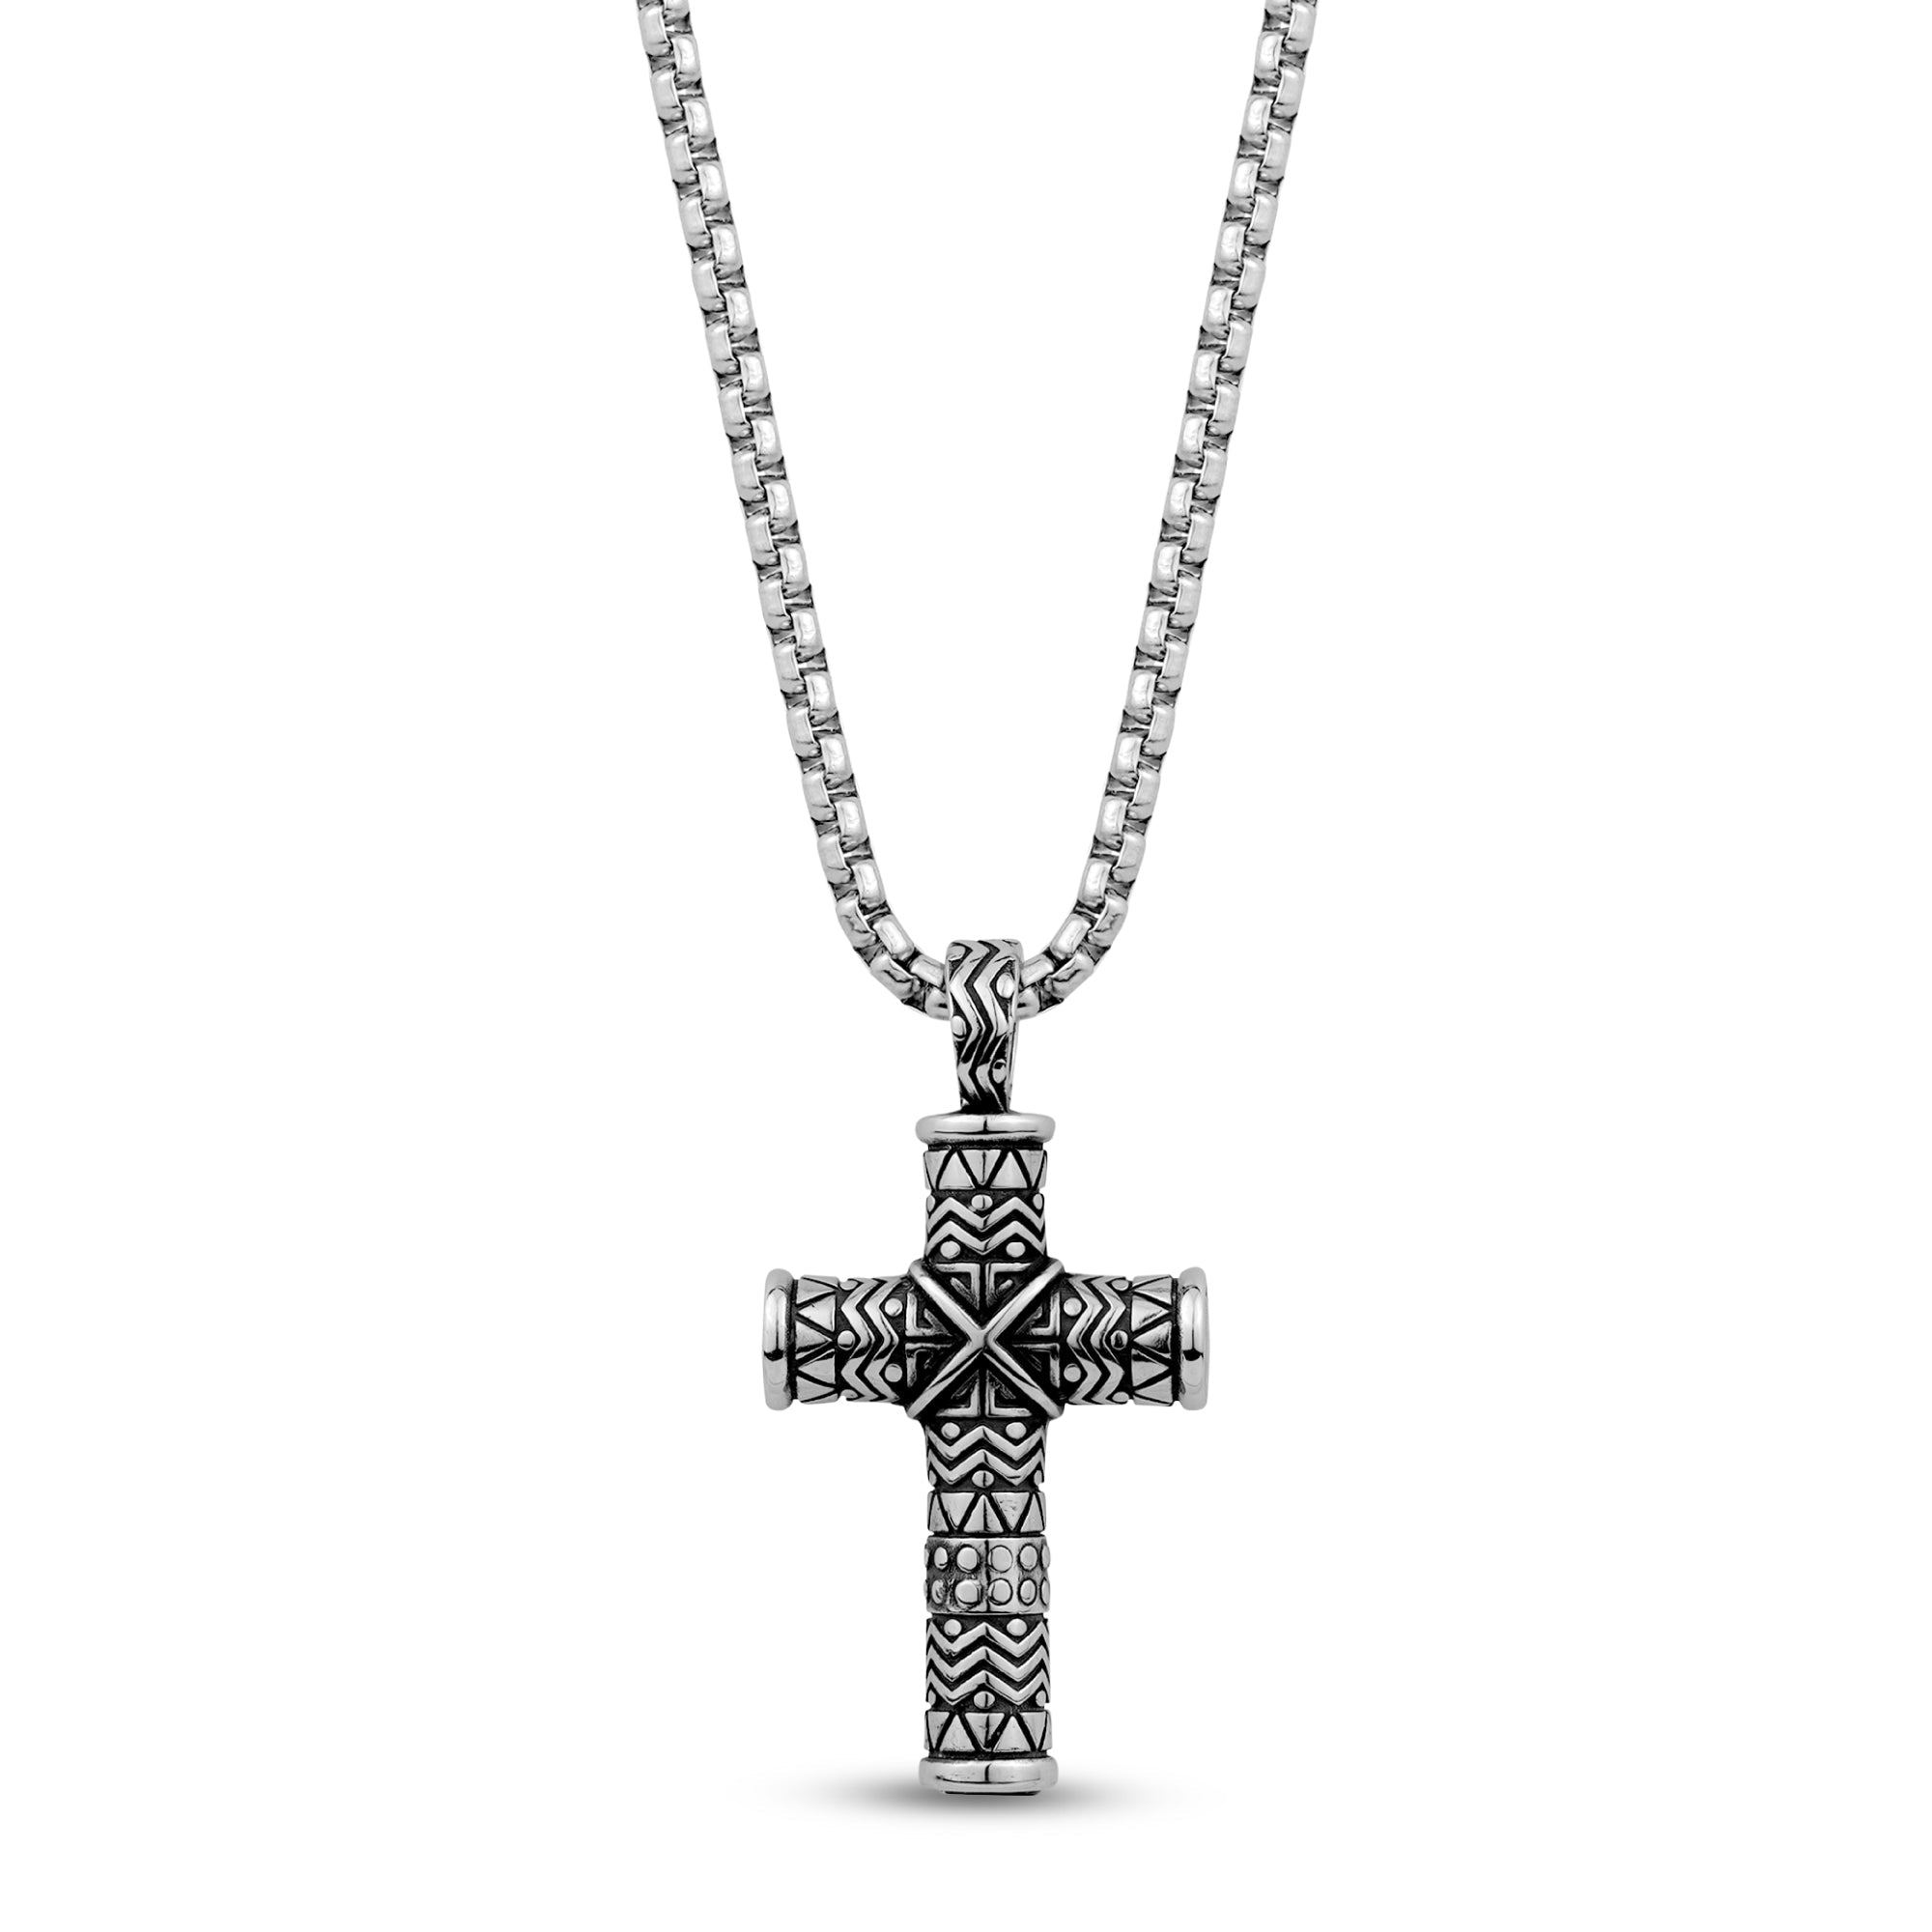 Buy Cremation Cross Necklace for Ashes Stainless Steel Cross Urn Pendant  Ashes Holder Memorial Jewelry-In Loving Memory(Black) at Amazon.in